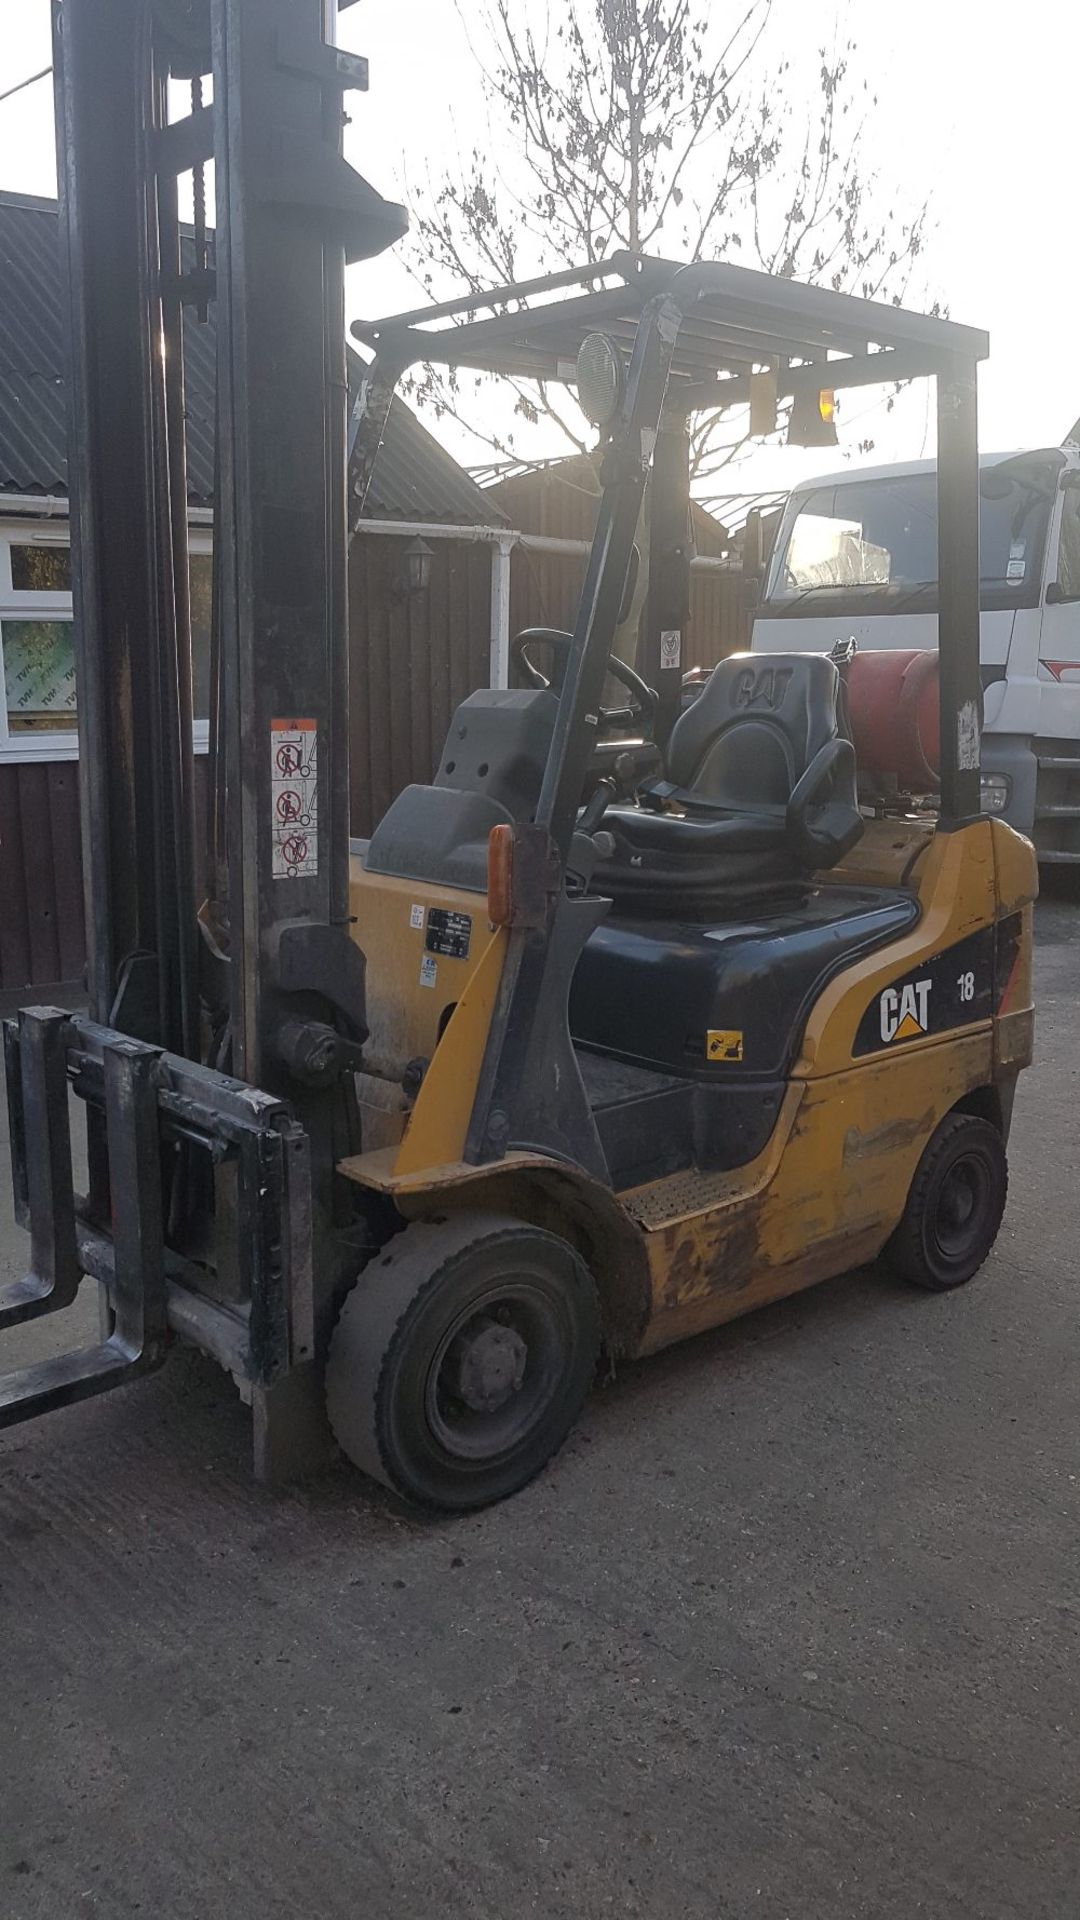 CATERPILLAR GP18N GAS FORKLIFT TRUCK, YEAR 2013 BUILD, 4METRE LIFT MAST, SIDE SHIFT. VENDORS - Image 2 of 4